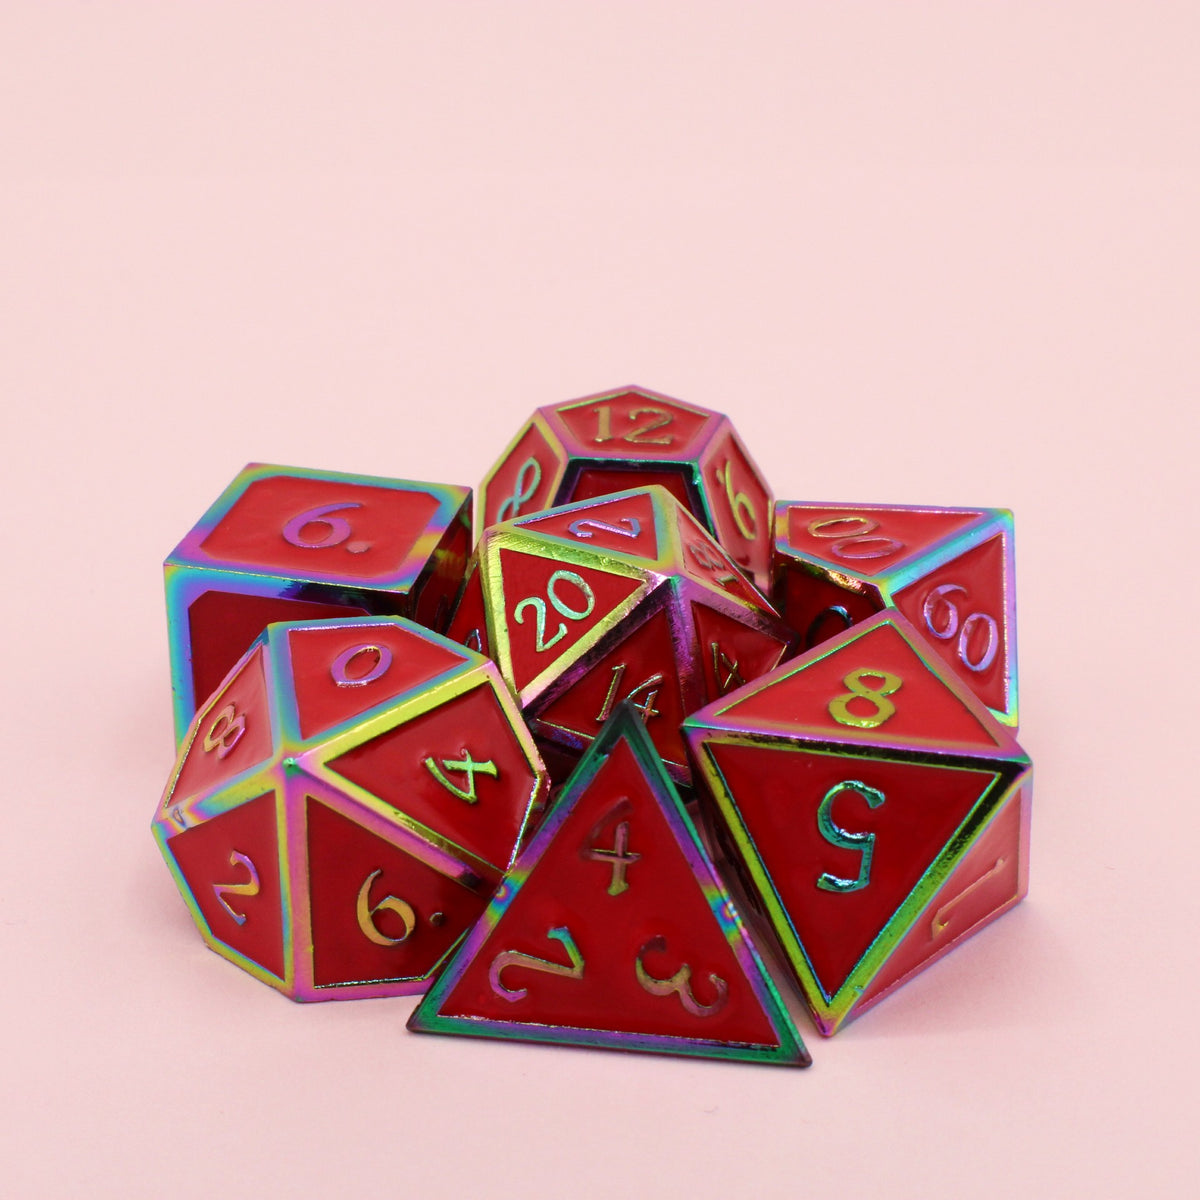 Red with Rainbow Framed Metal Dice Set!